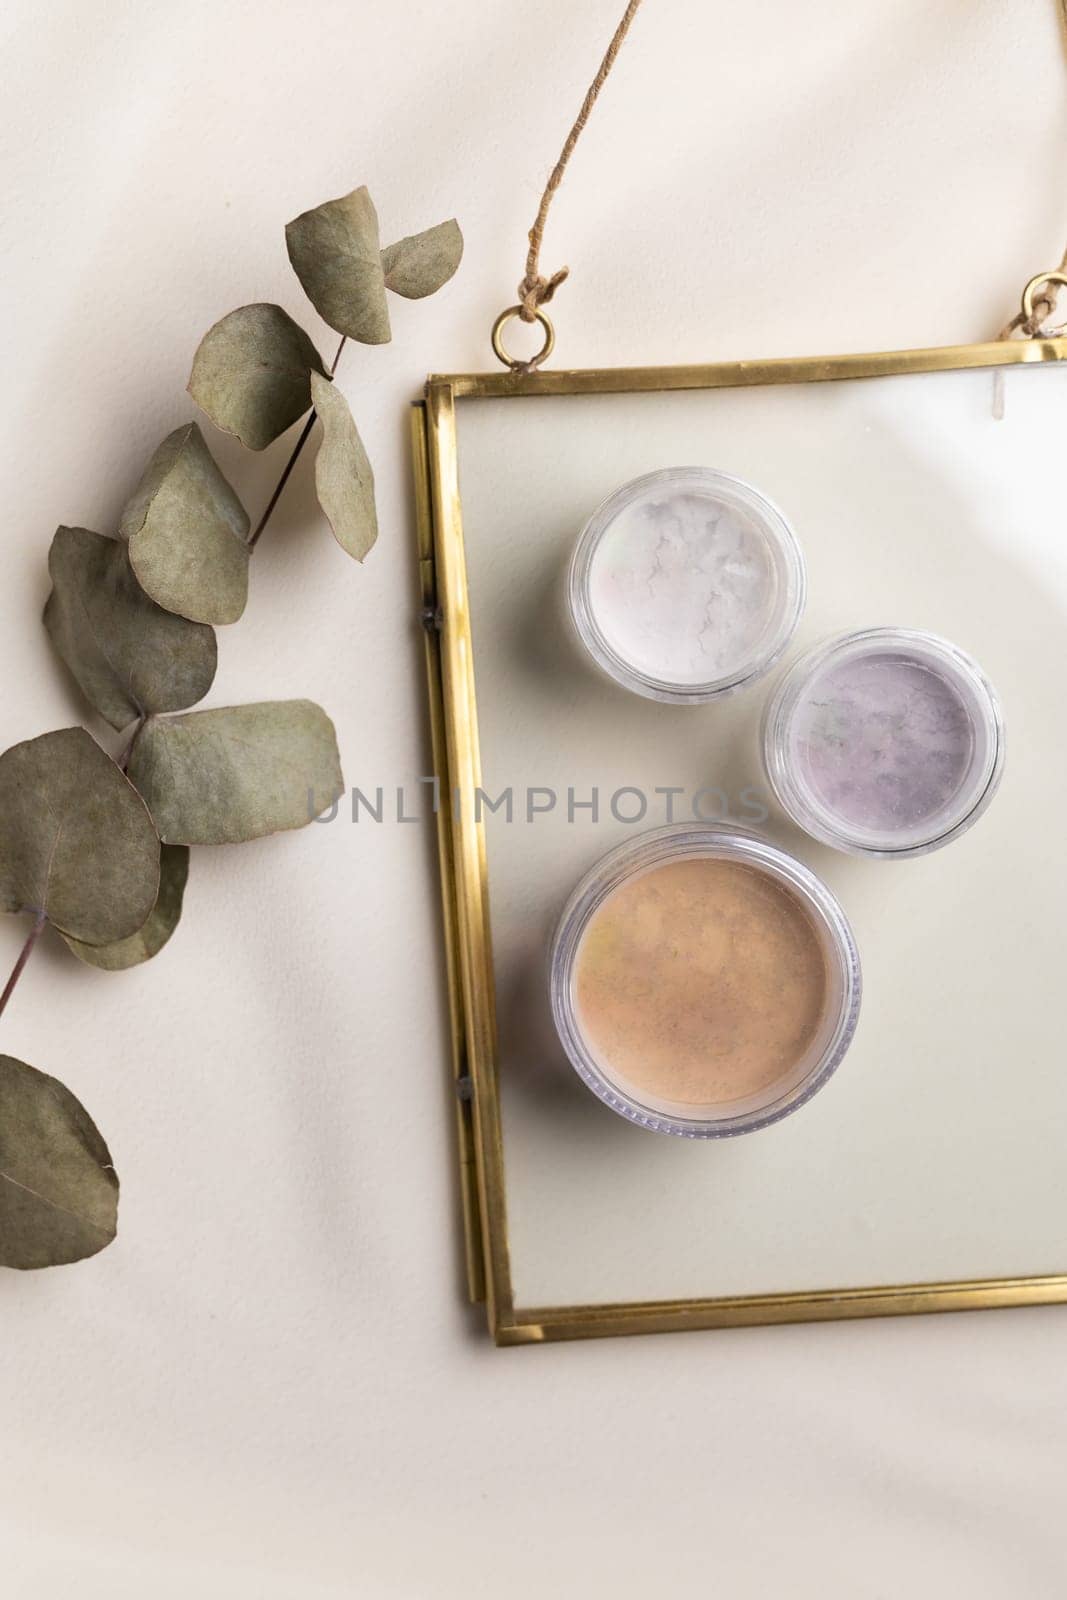 Top view eye shadow and facial powder. Aesthetics of makeup artist, make-up for yourself and beauty salon.